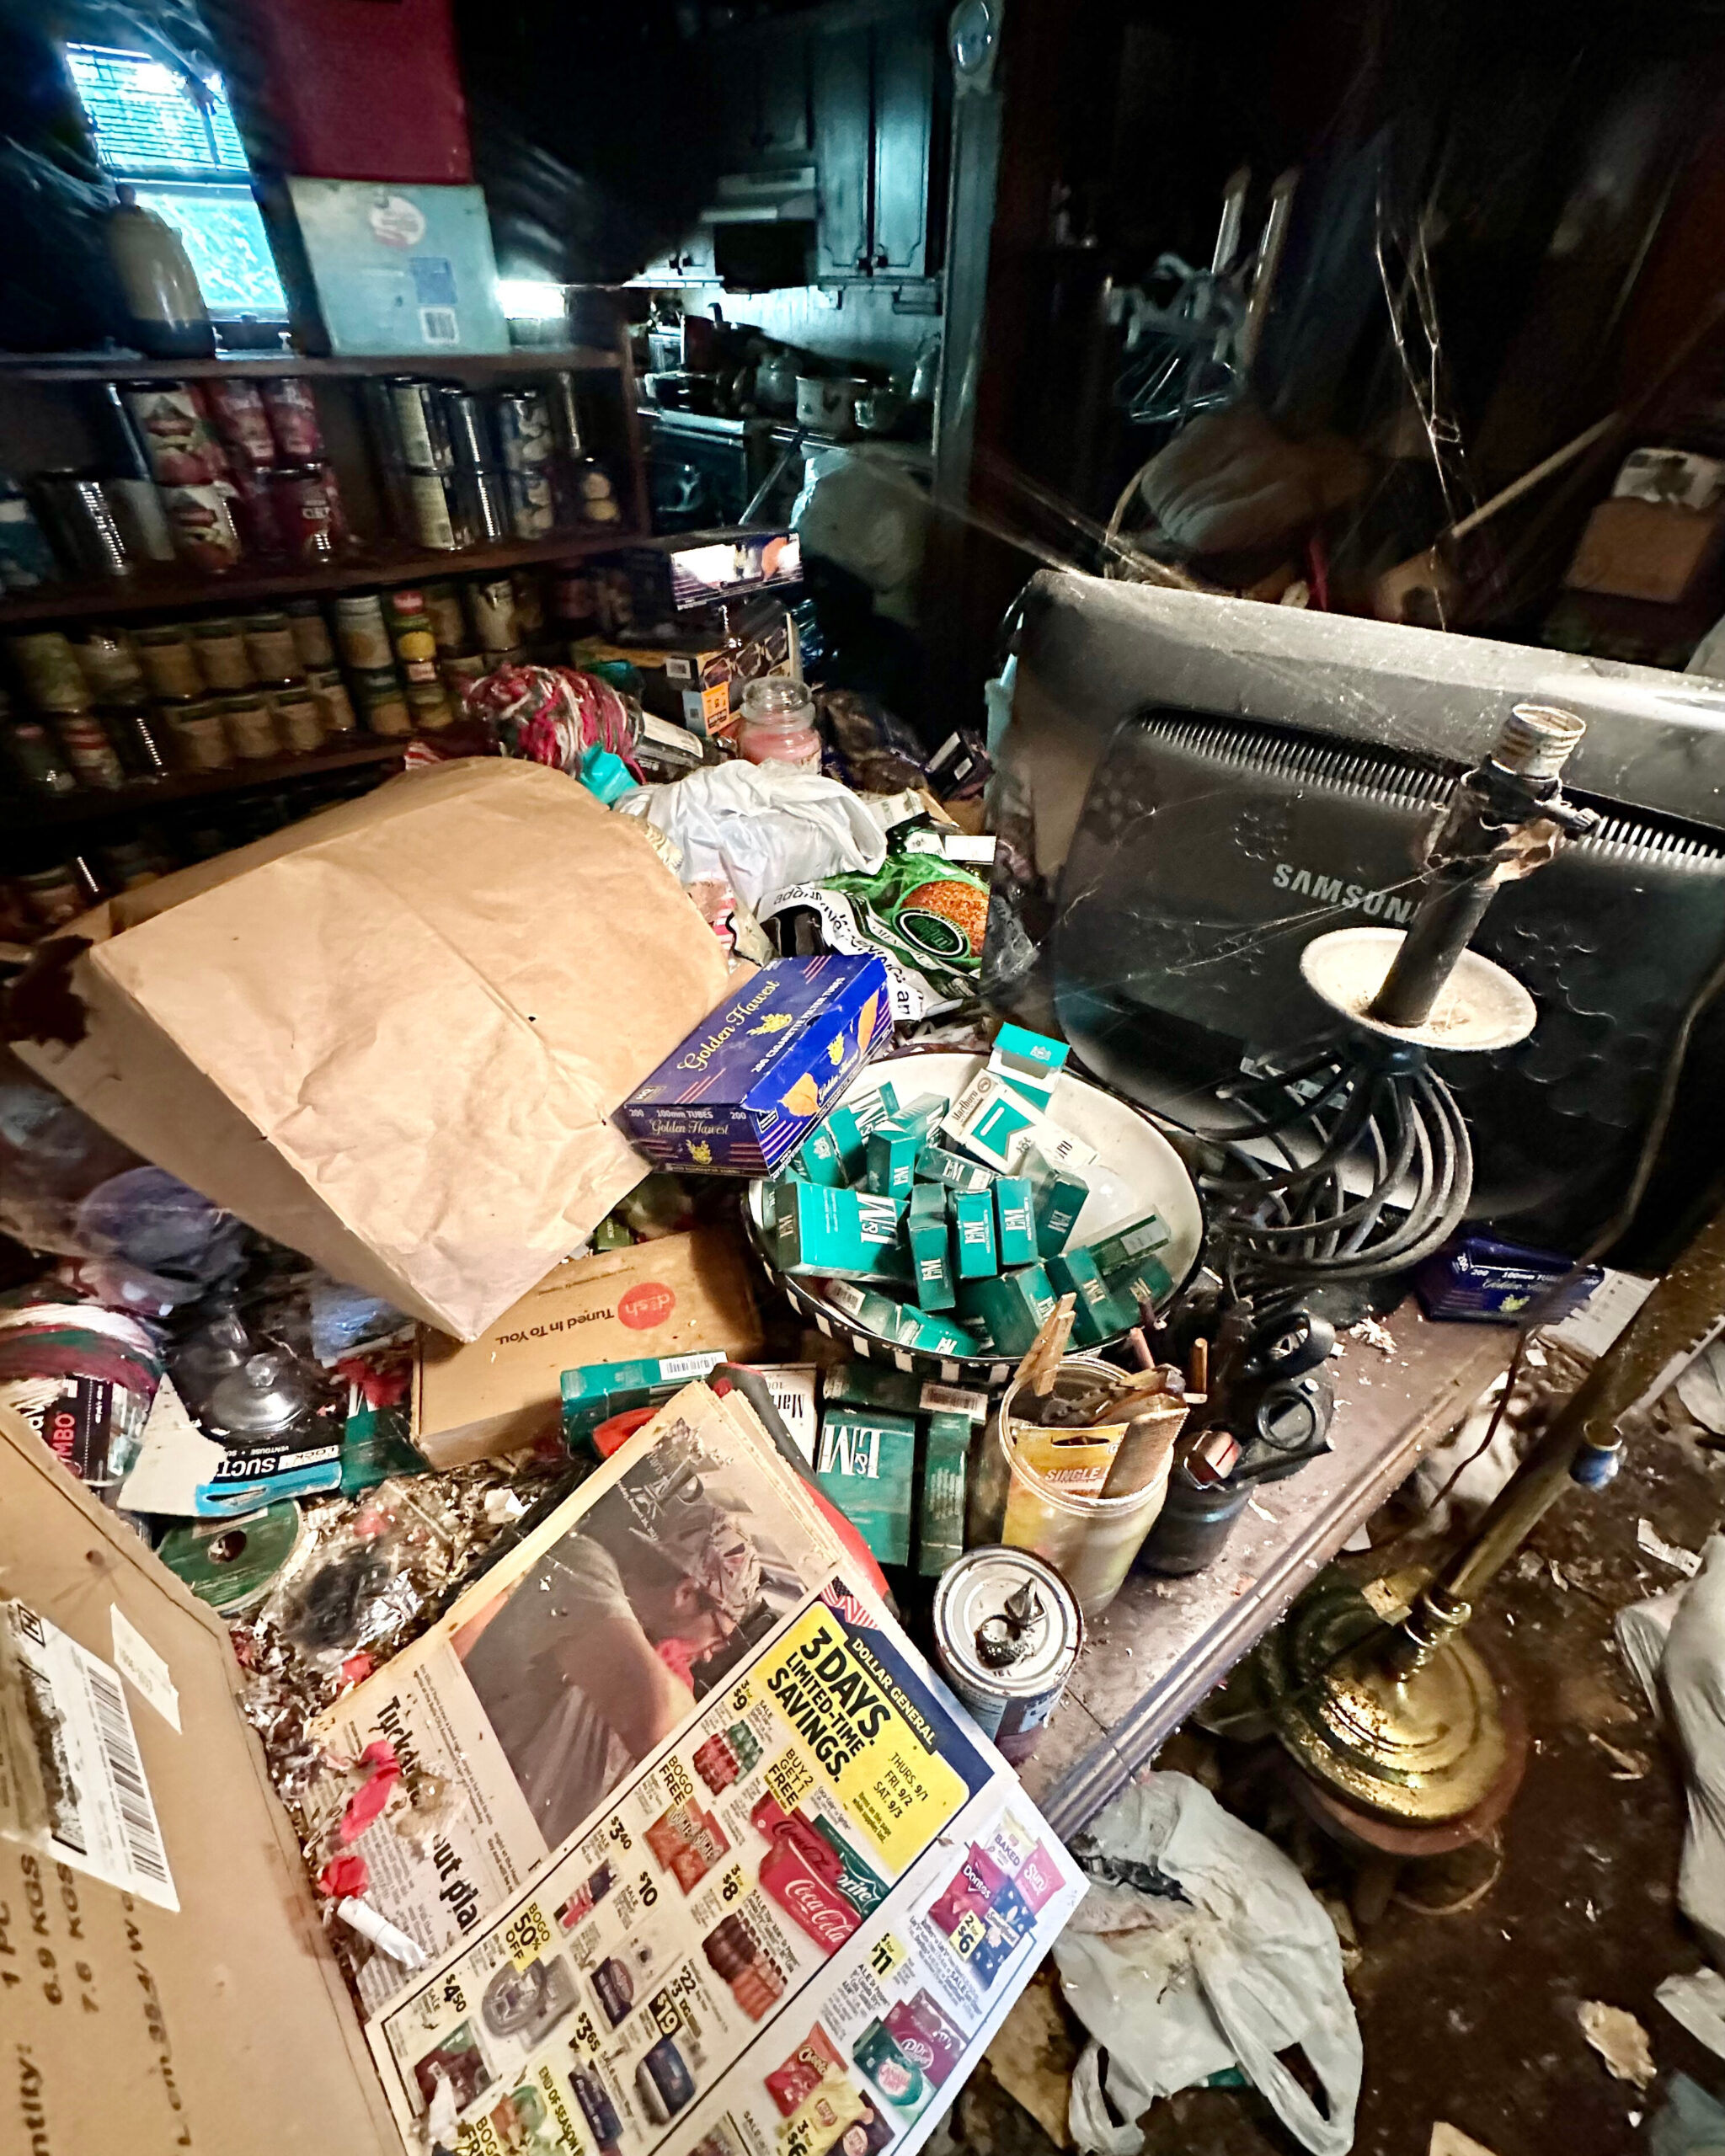 An extremely cluttered room is full of trash and detritus.